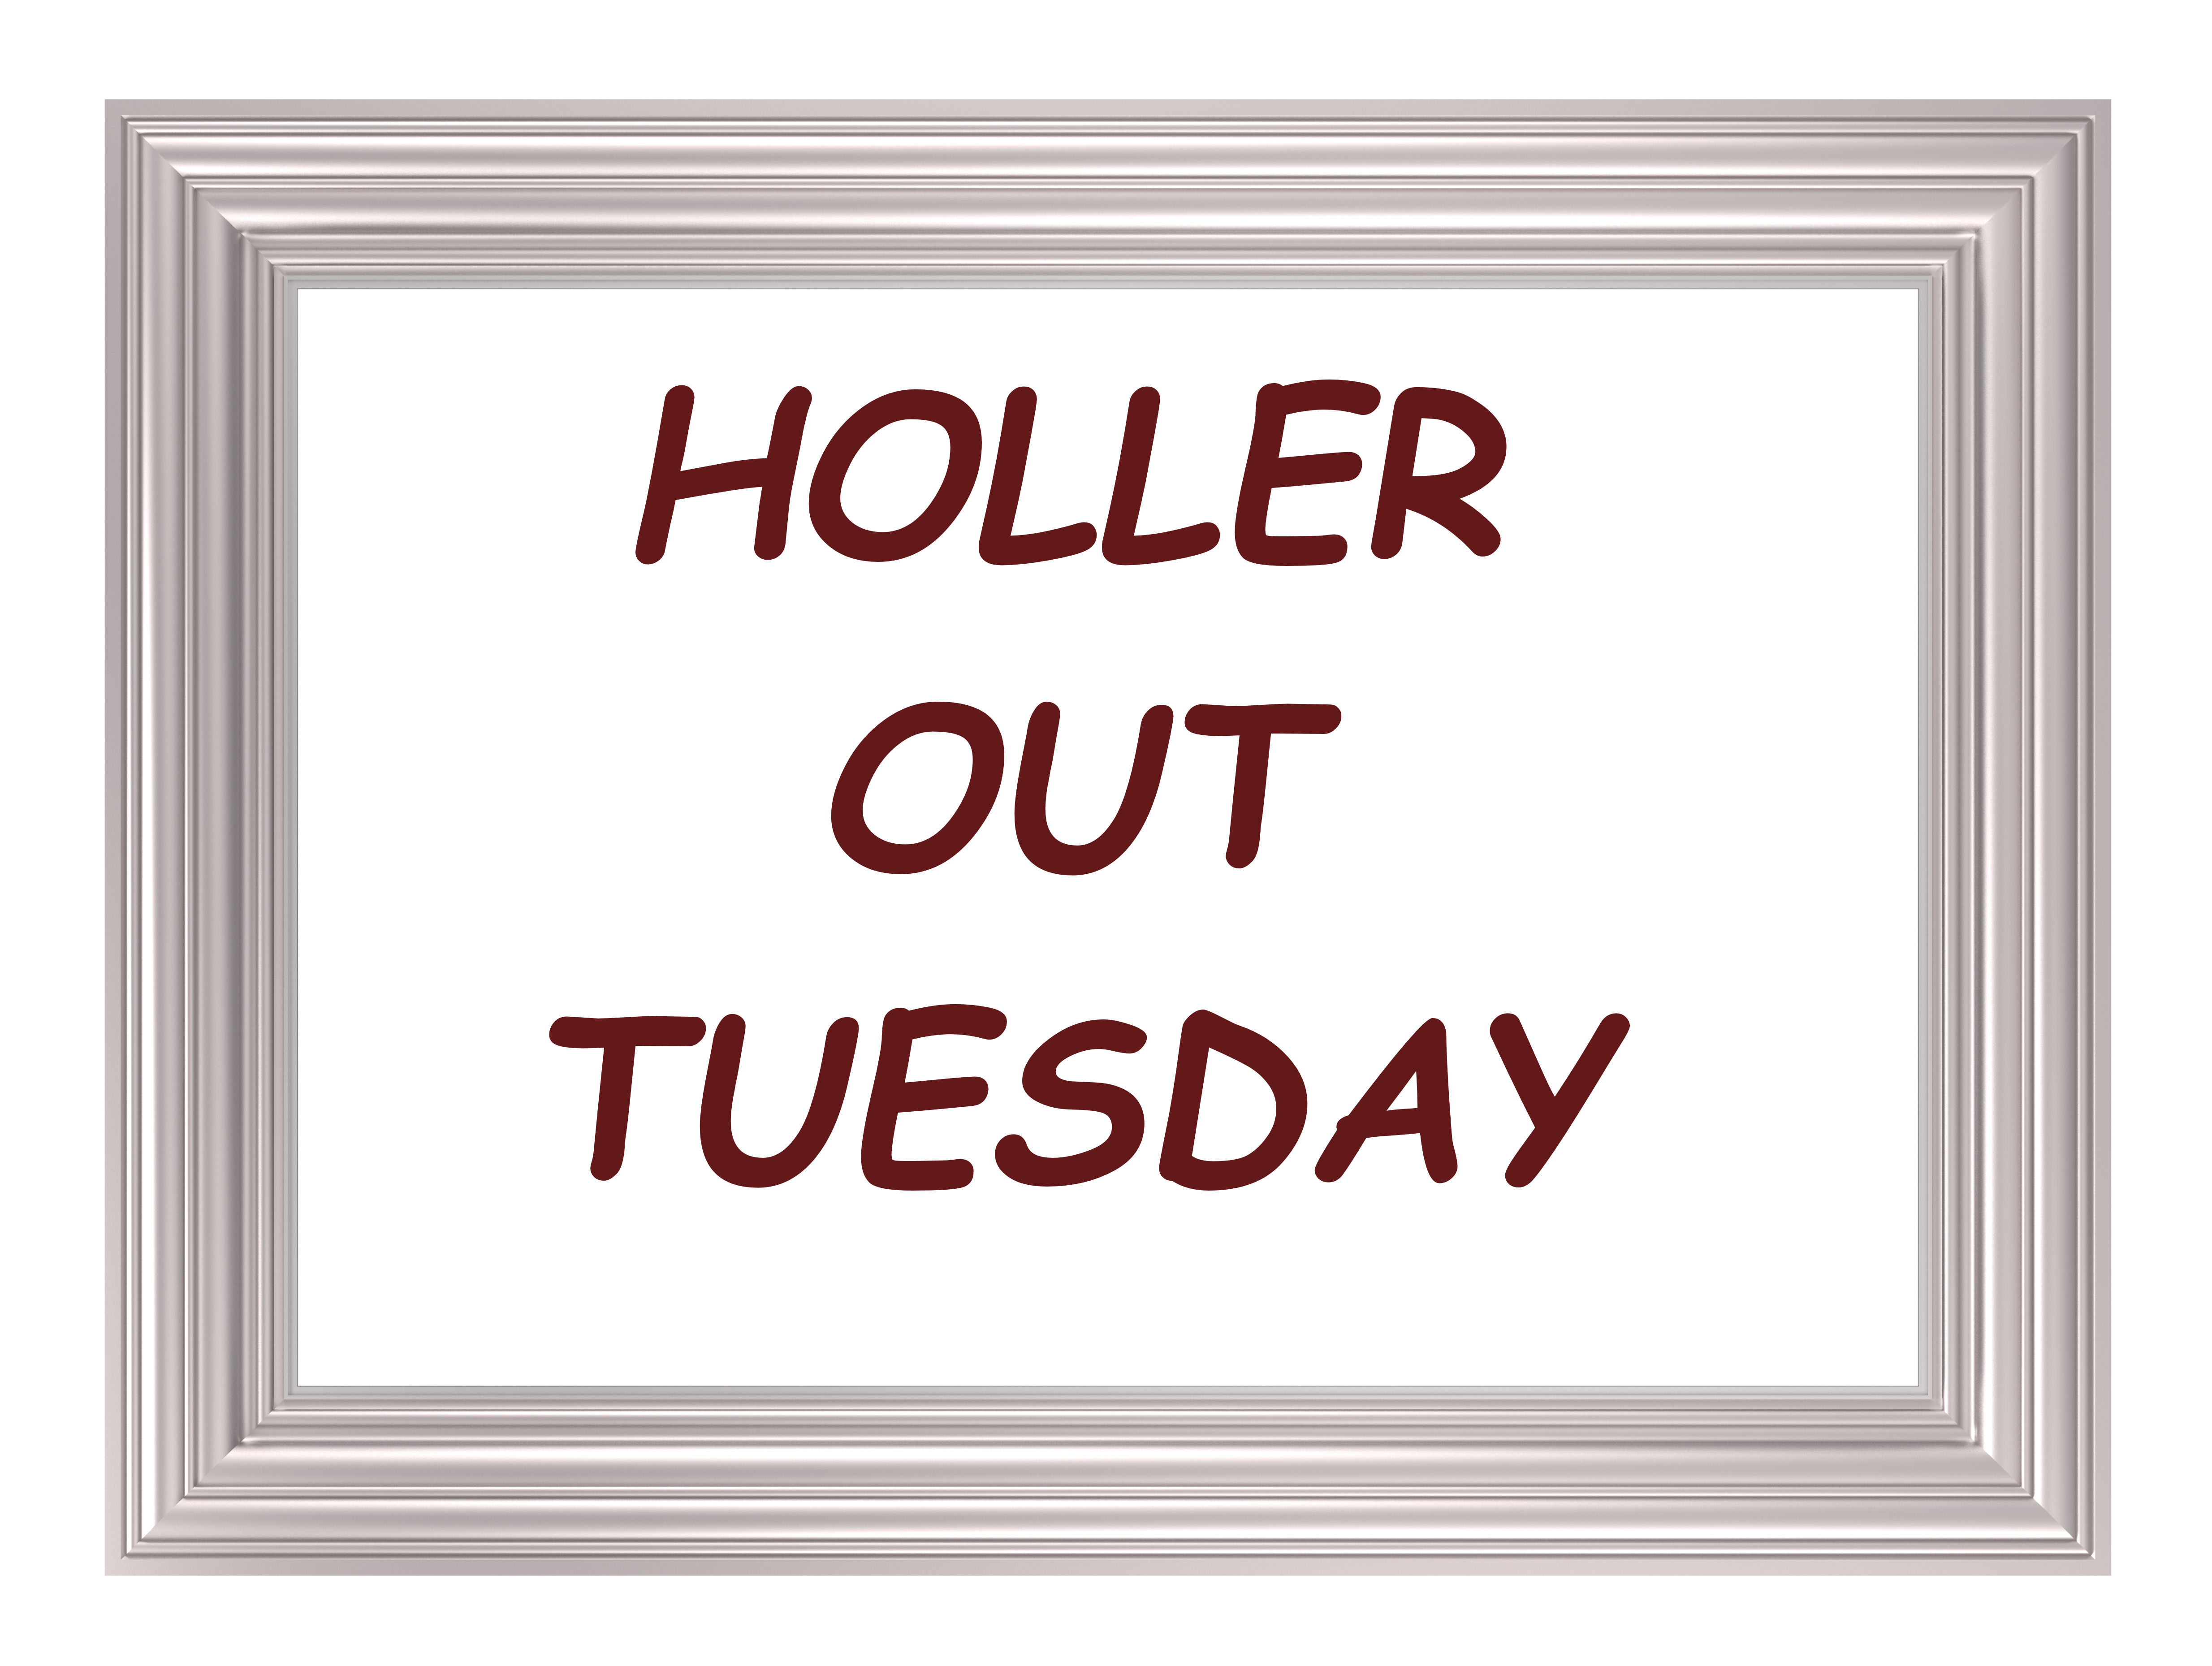 HOLLER OUT TUESDAY.jpg